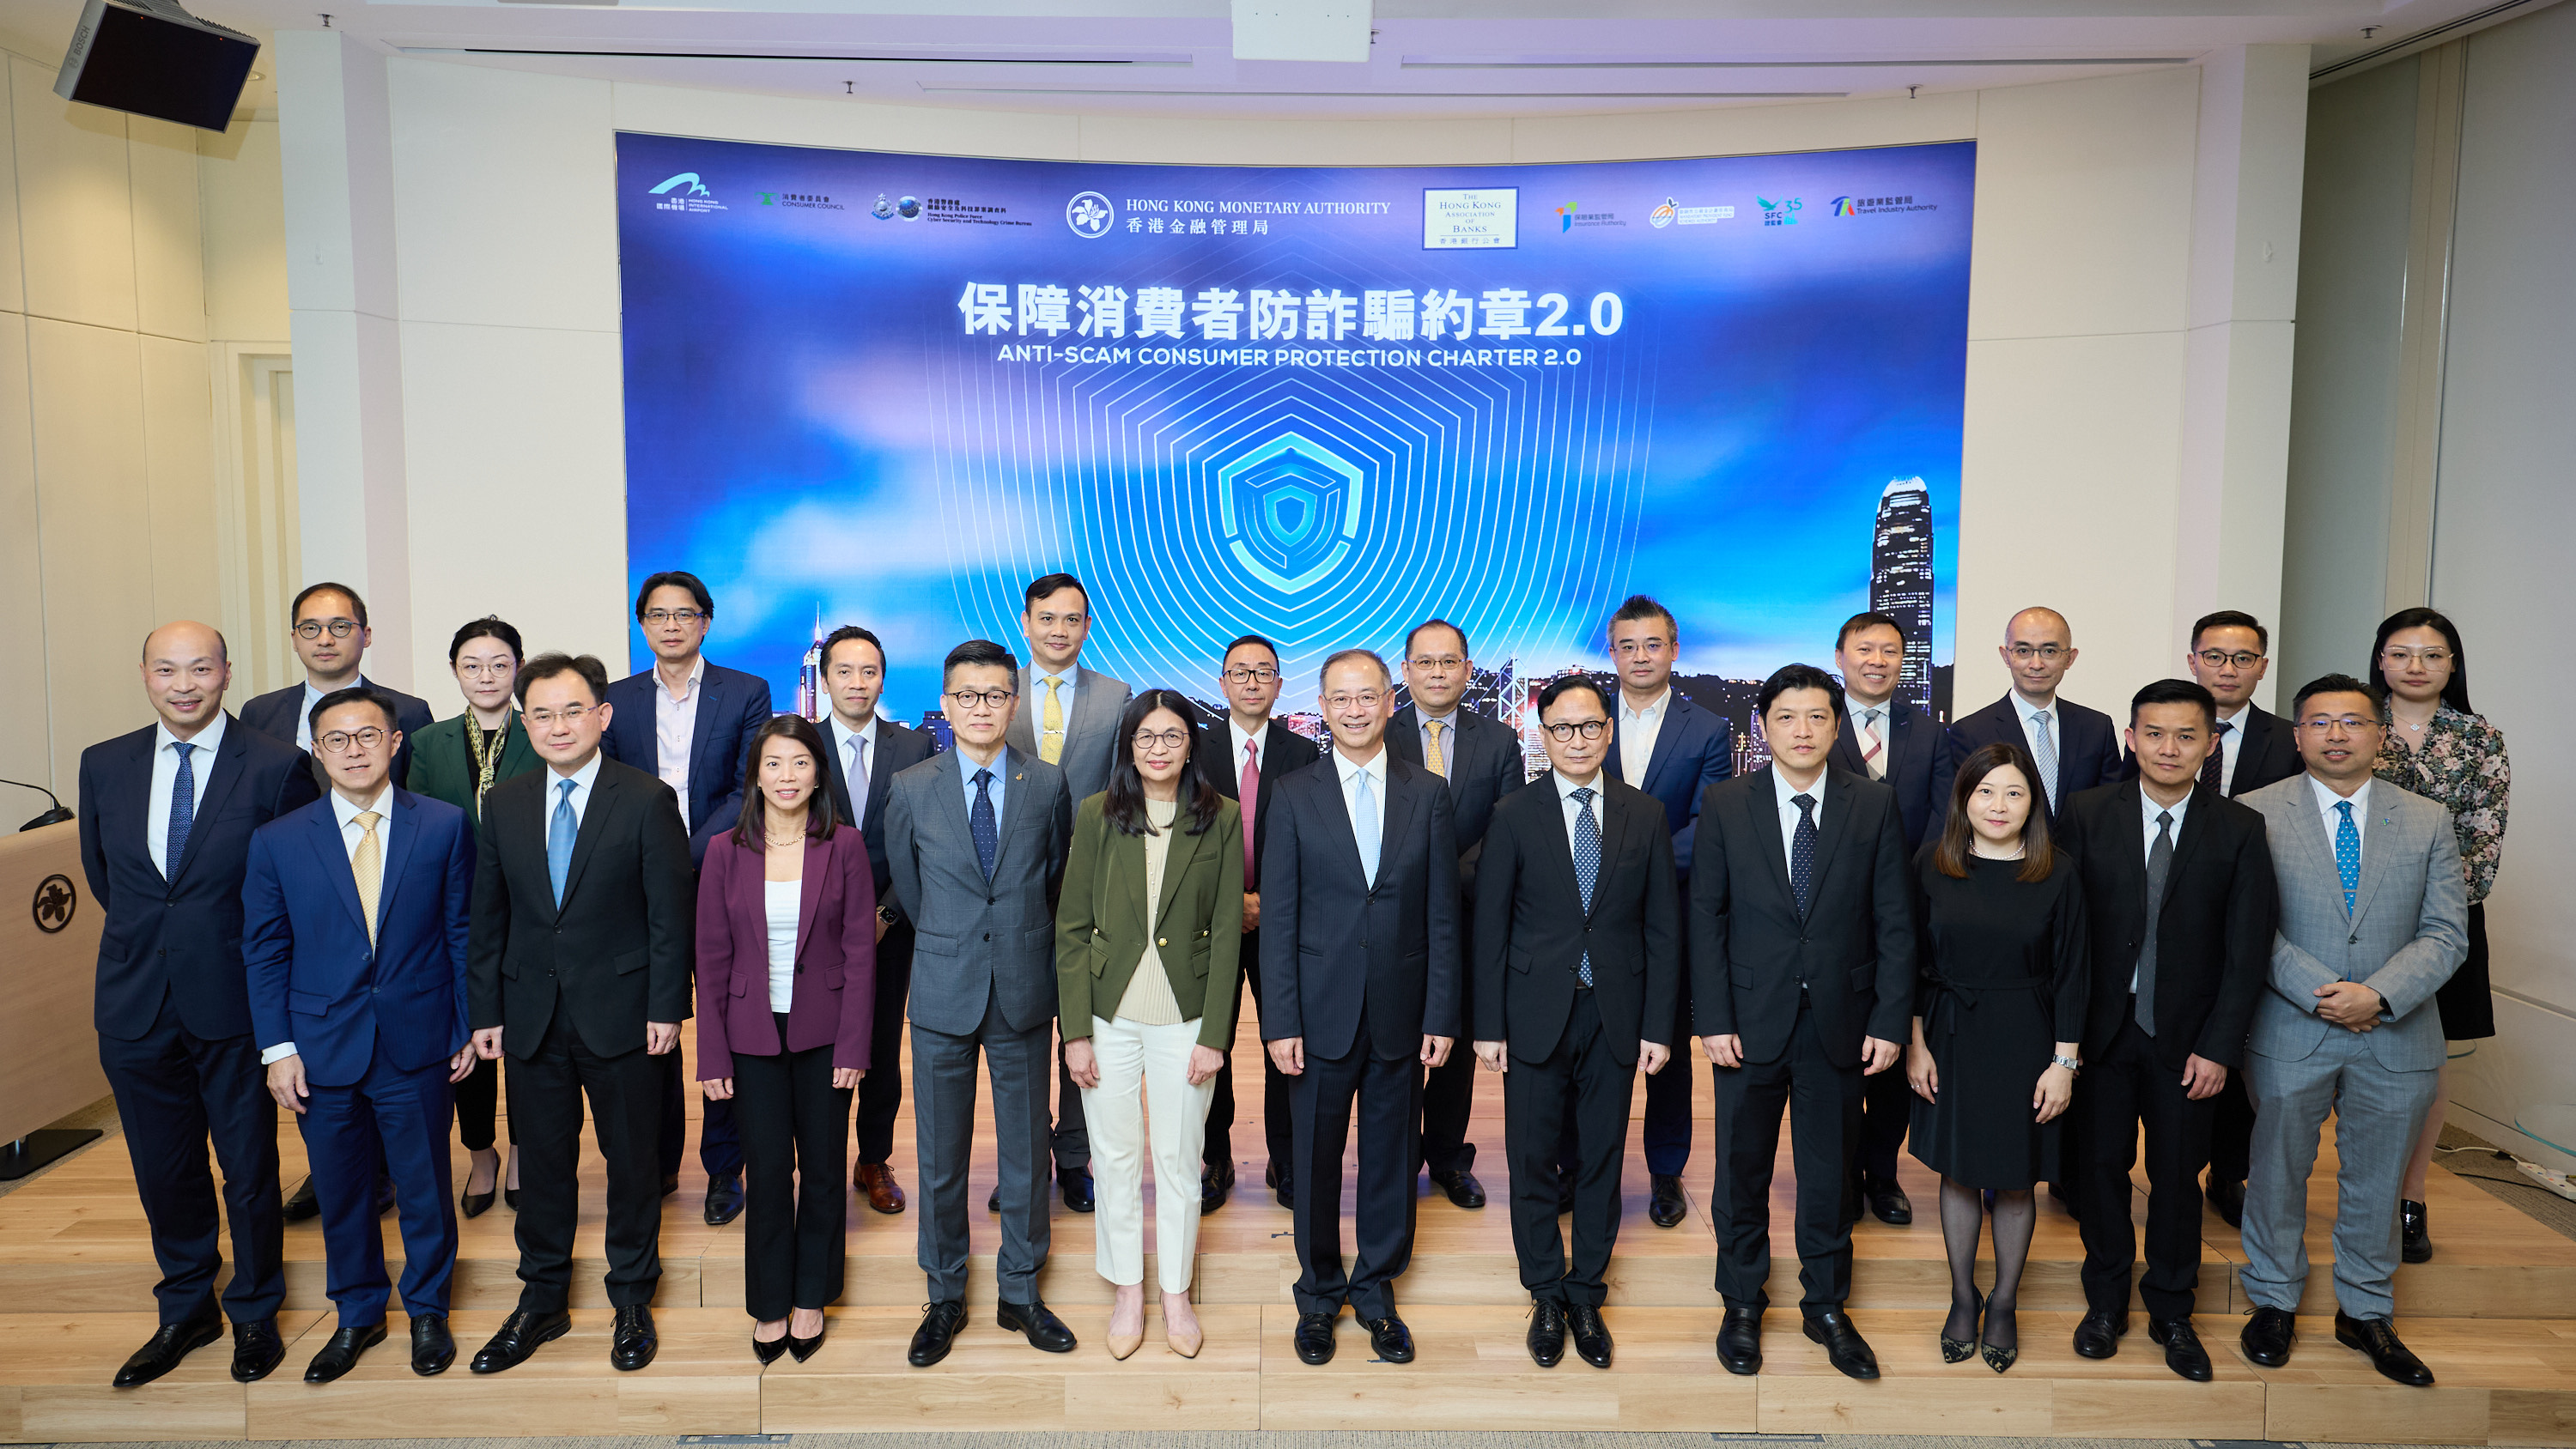 Mr Eddie Yue, Chief Executive of the Hong Kong Monetary Authority (seventh from left); Mr Clement Cheung, Chief Executive Officer of the Insurance Authority (eighth from left); Mr Cheng Yan-chee, Managing Director of the Mandatory Provident Fund Schemes Authority (fifth from left); Ms Julia Leung, Chief Executive Officer of the Securities and Futures Commission (sixth from left); and representatives of financial institutions attend the event to support the Anti-Scam Consumer Protection Charter 2.0.